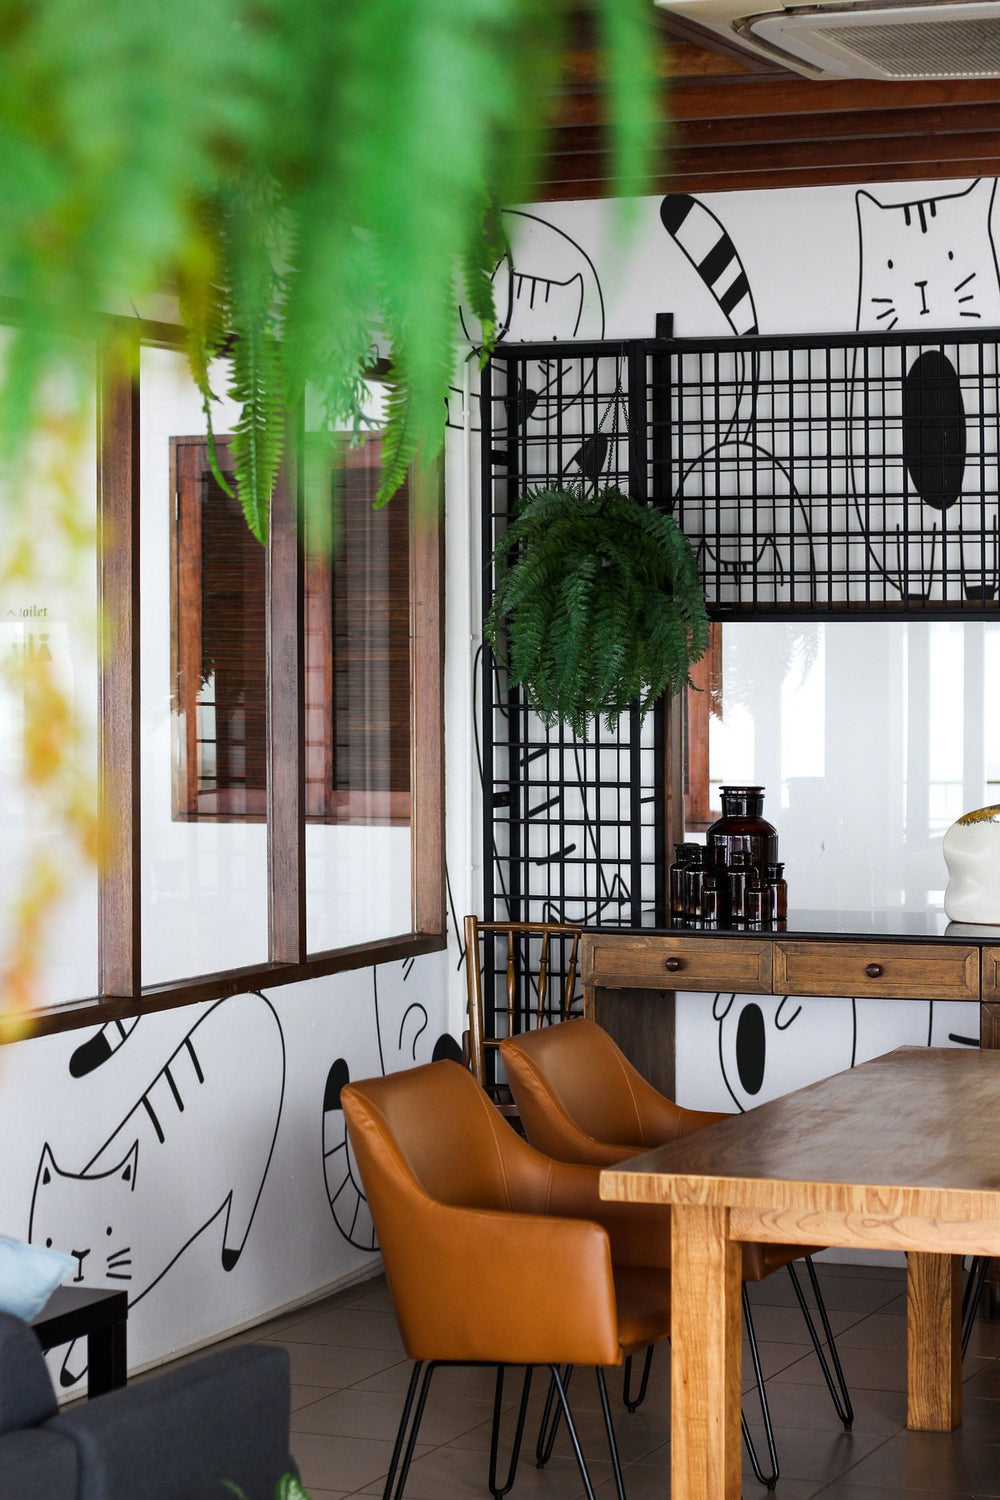 Interior view of a modern cafe with stylish furnishings and a playful cat mural on the wall.